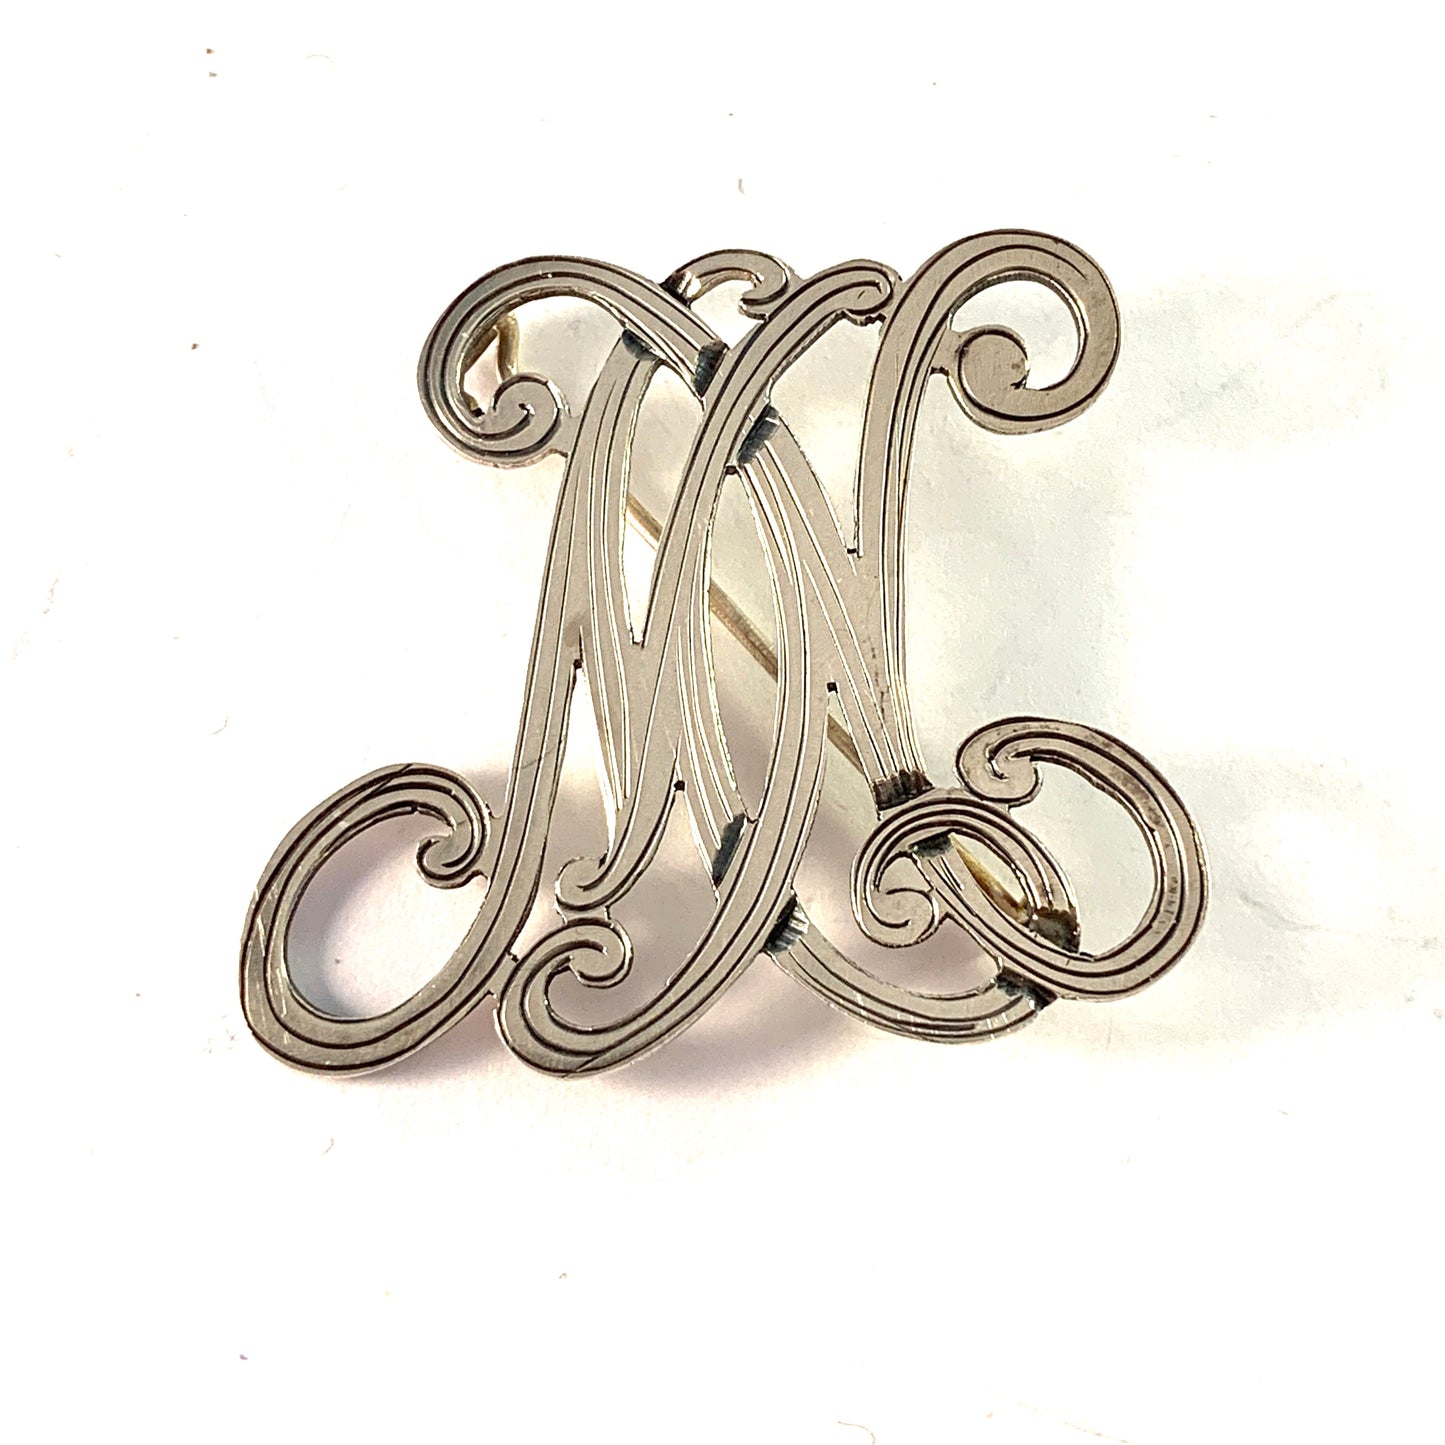 Germany c 1890 Victorian 830 Silver Monogram Brooch. MN or MH